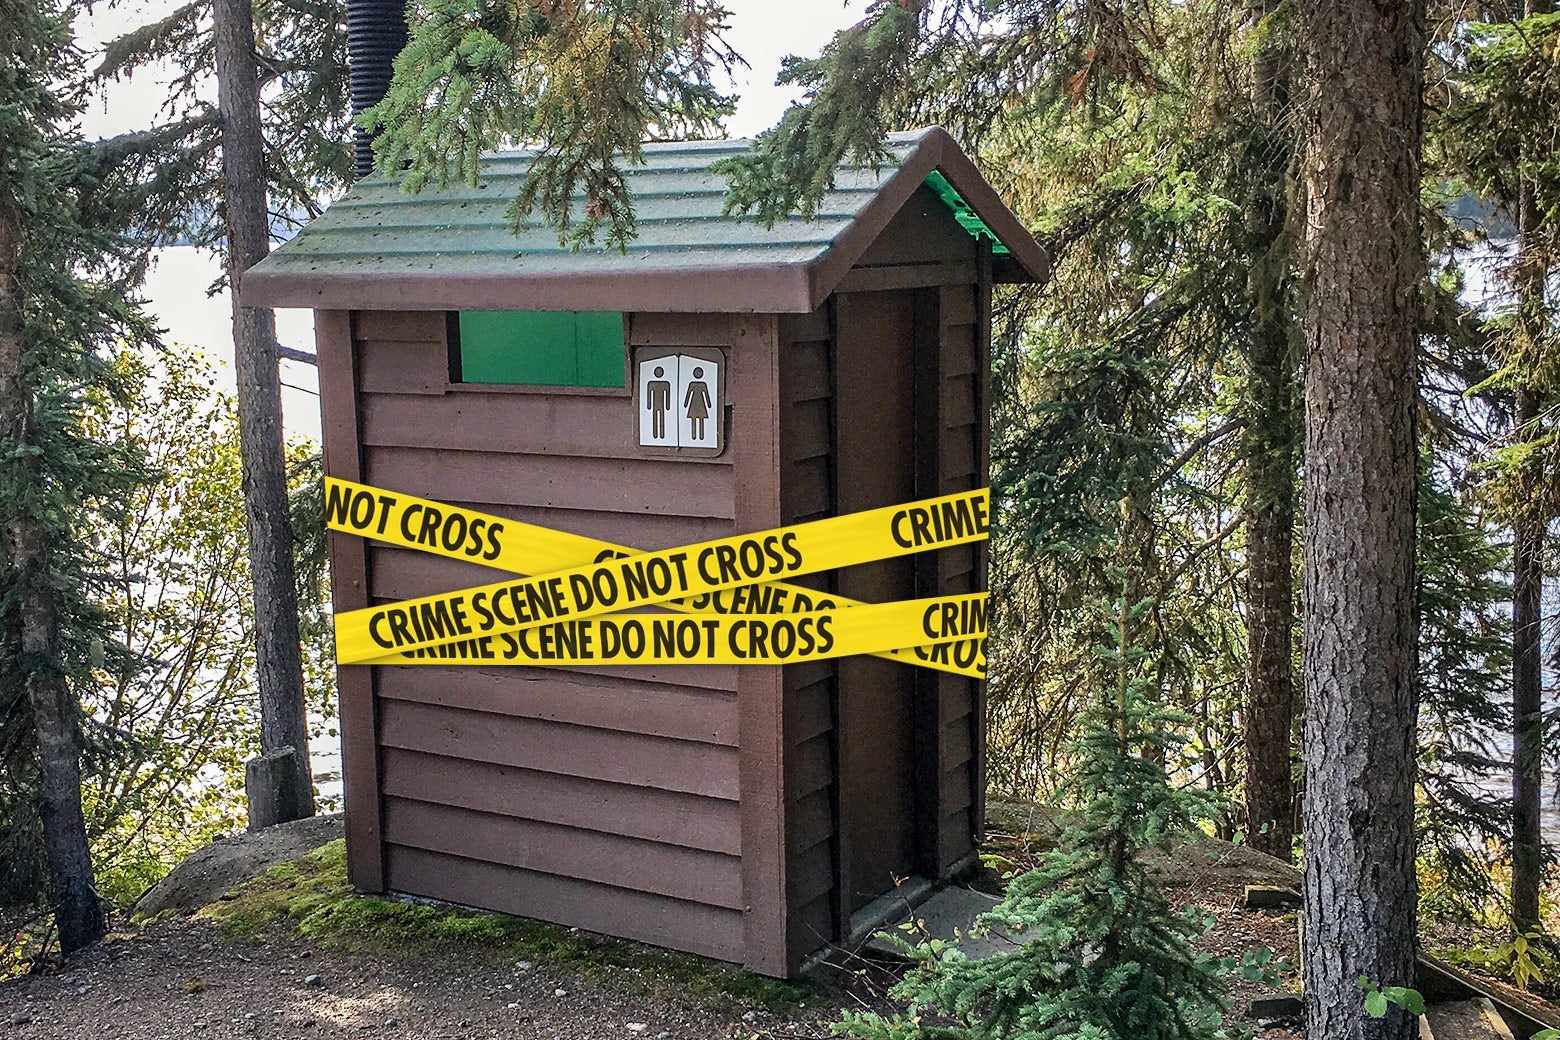 Crime scene tape wraps around a public restroom in a wooded area of a park.